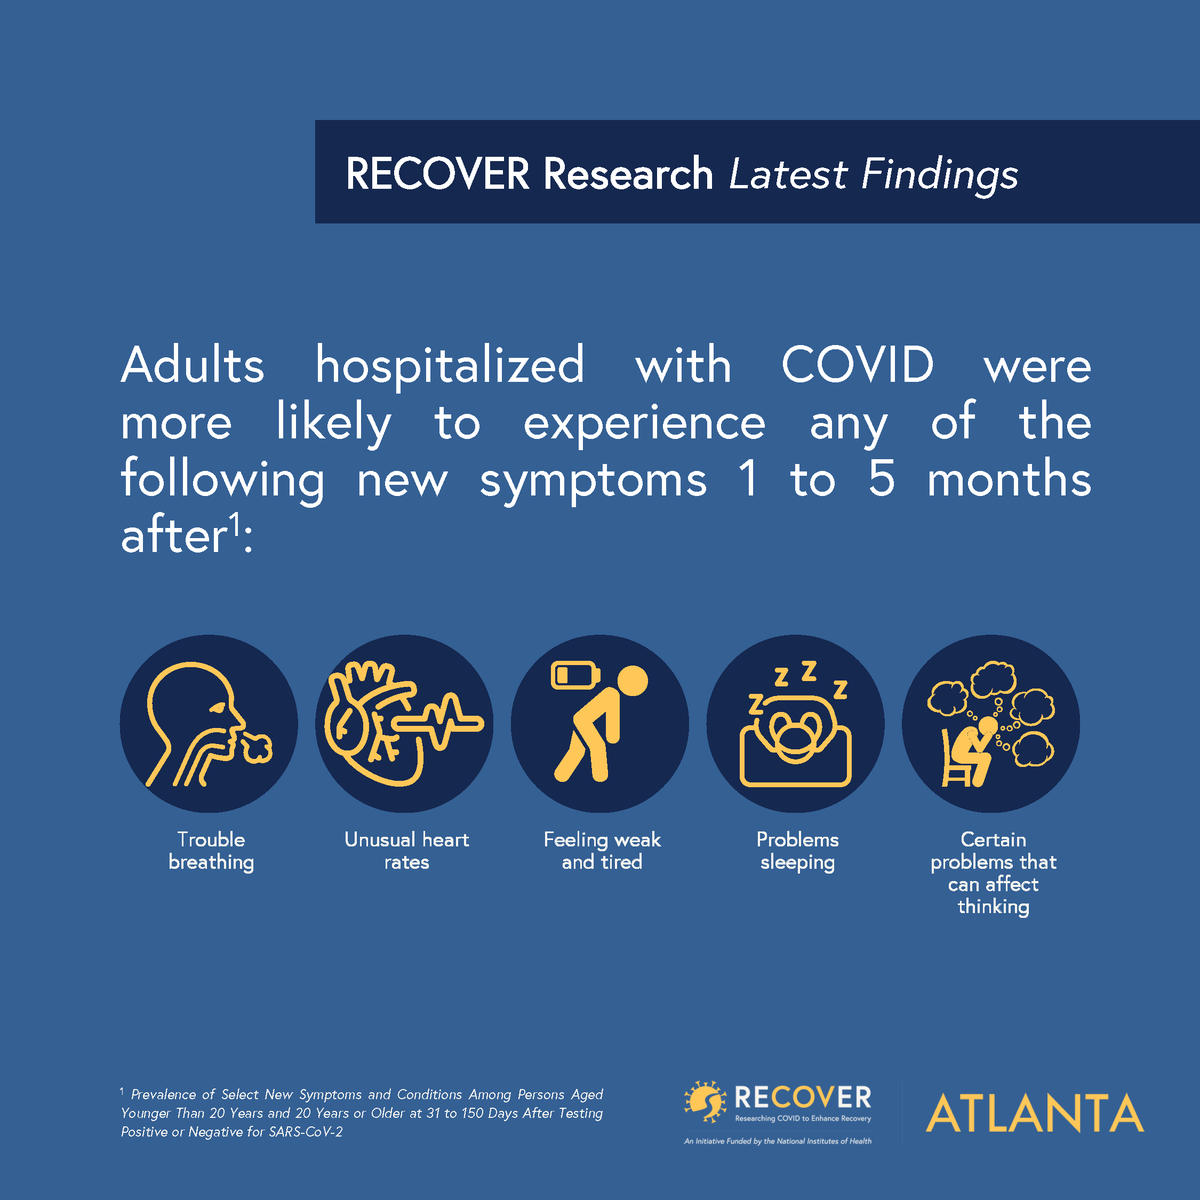 🗞️💭#DYK people hospitalized with COVID could experience these symptoms? Visit recovercovid.org/research-summa… to keep up with what RECOVER researchers are learning!

#Atlanta #Emory #Morehouse #KPGA #EmoryHope #AtlantaVAMC #COVID #LongCOVID #NIHRECOVER